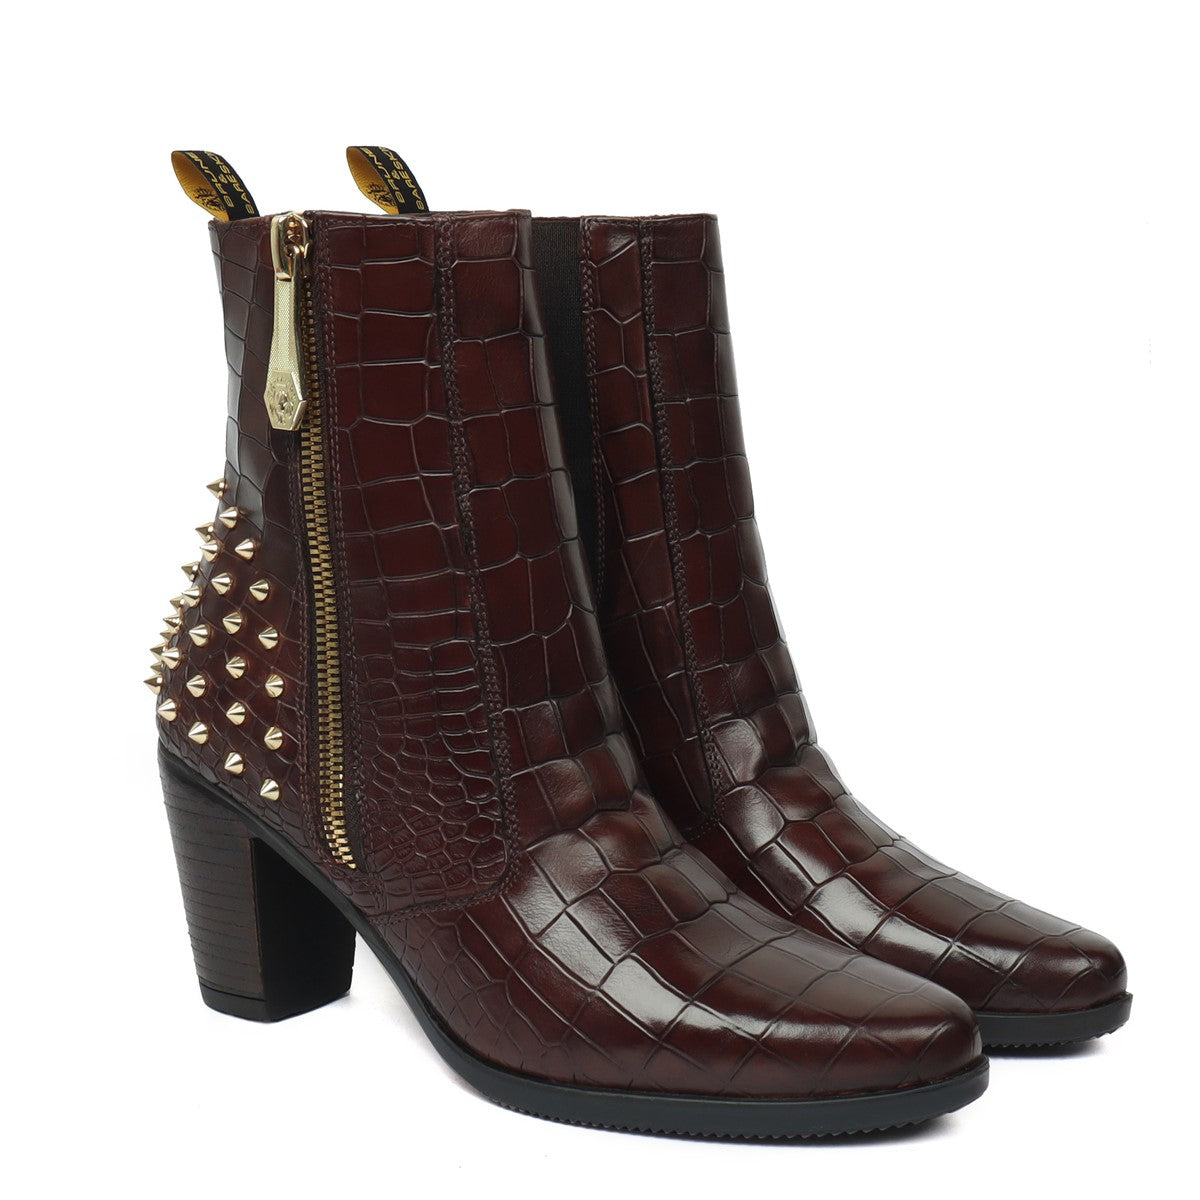 Studded Brown Boots for Ladies in Deep Cut Croco Textured Leather by Brune & Bareskin